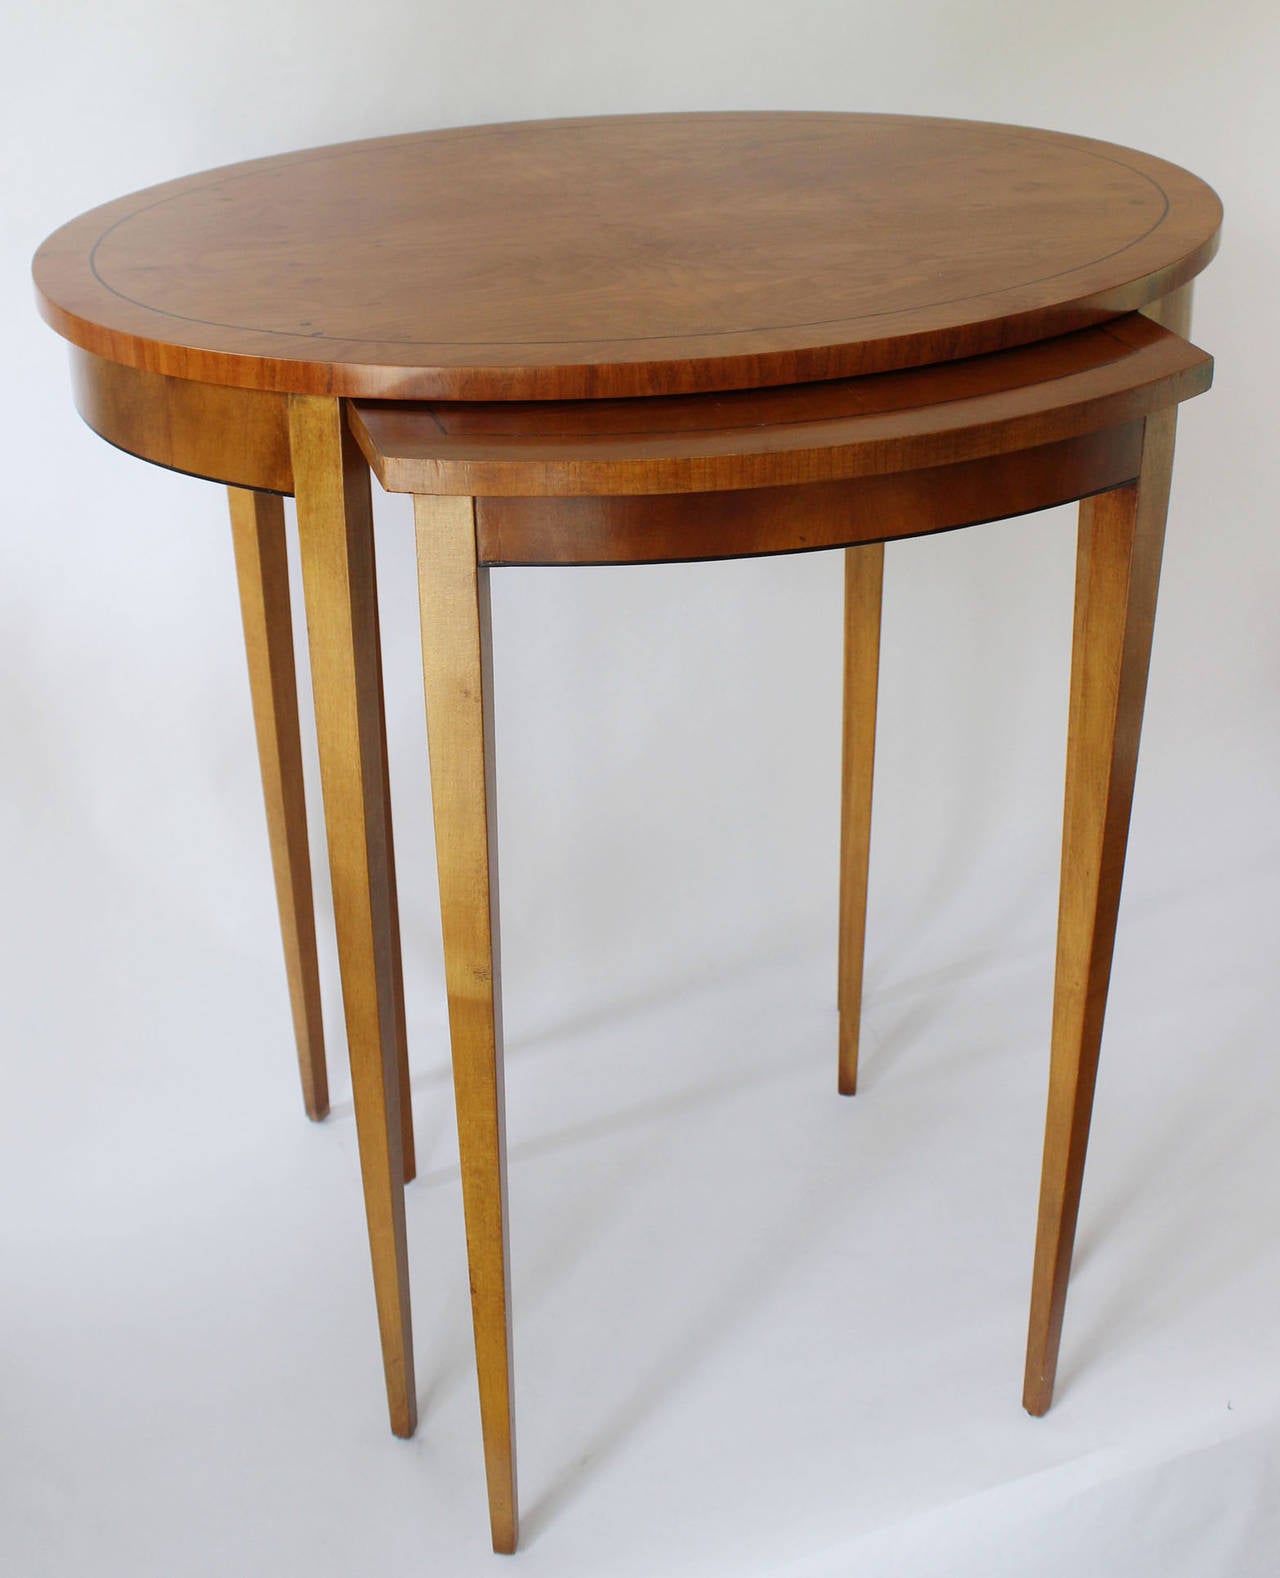 A pair of Burled walnut nested side tables by Baker.